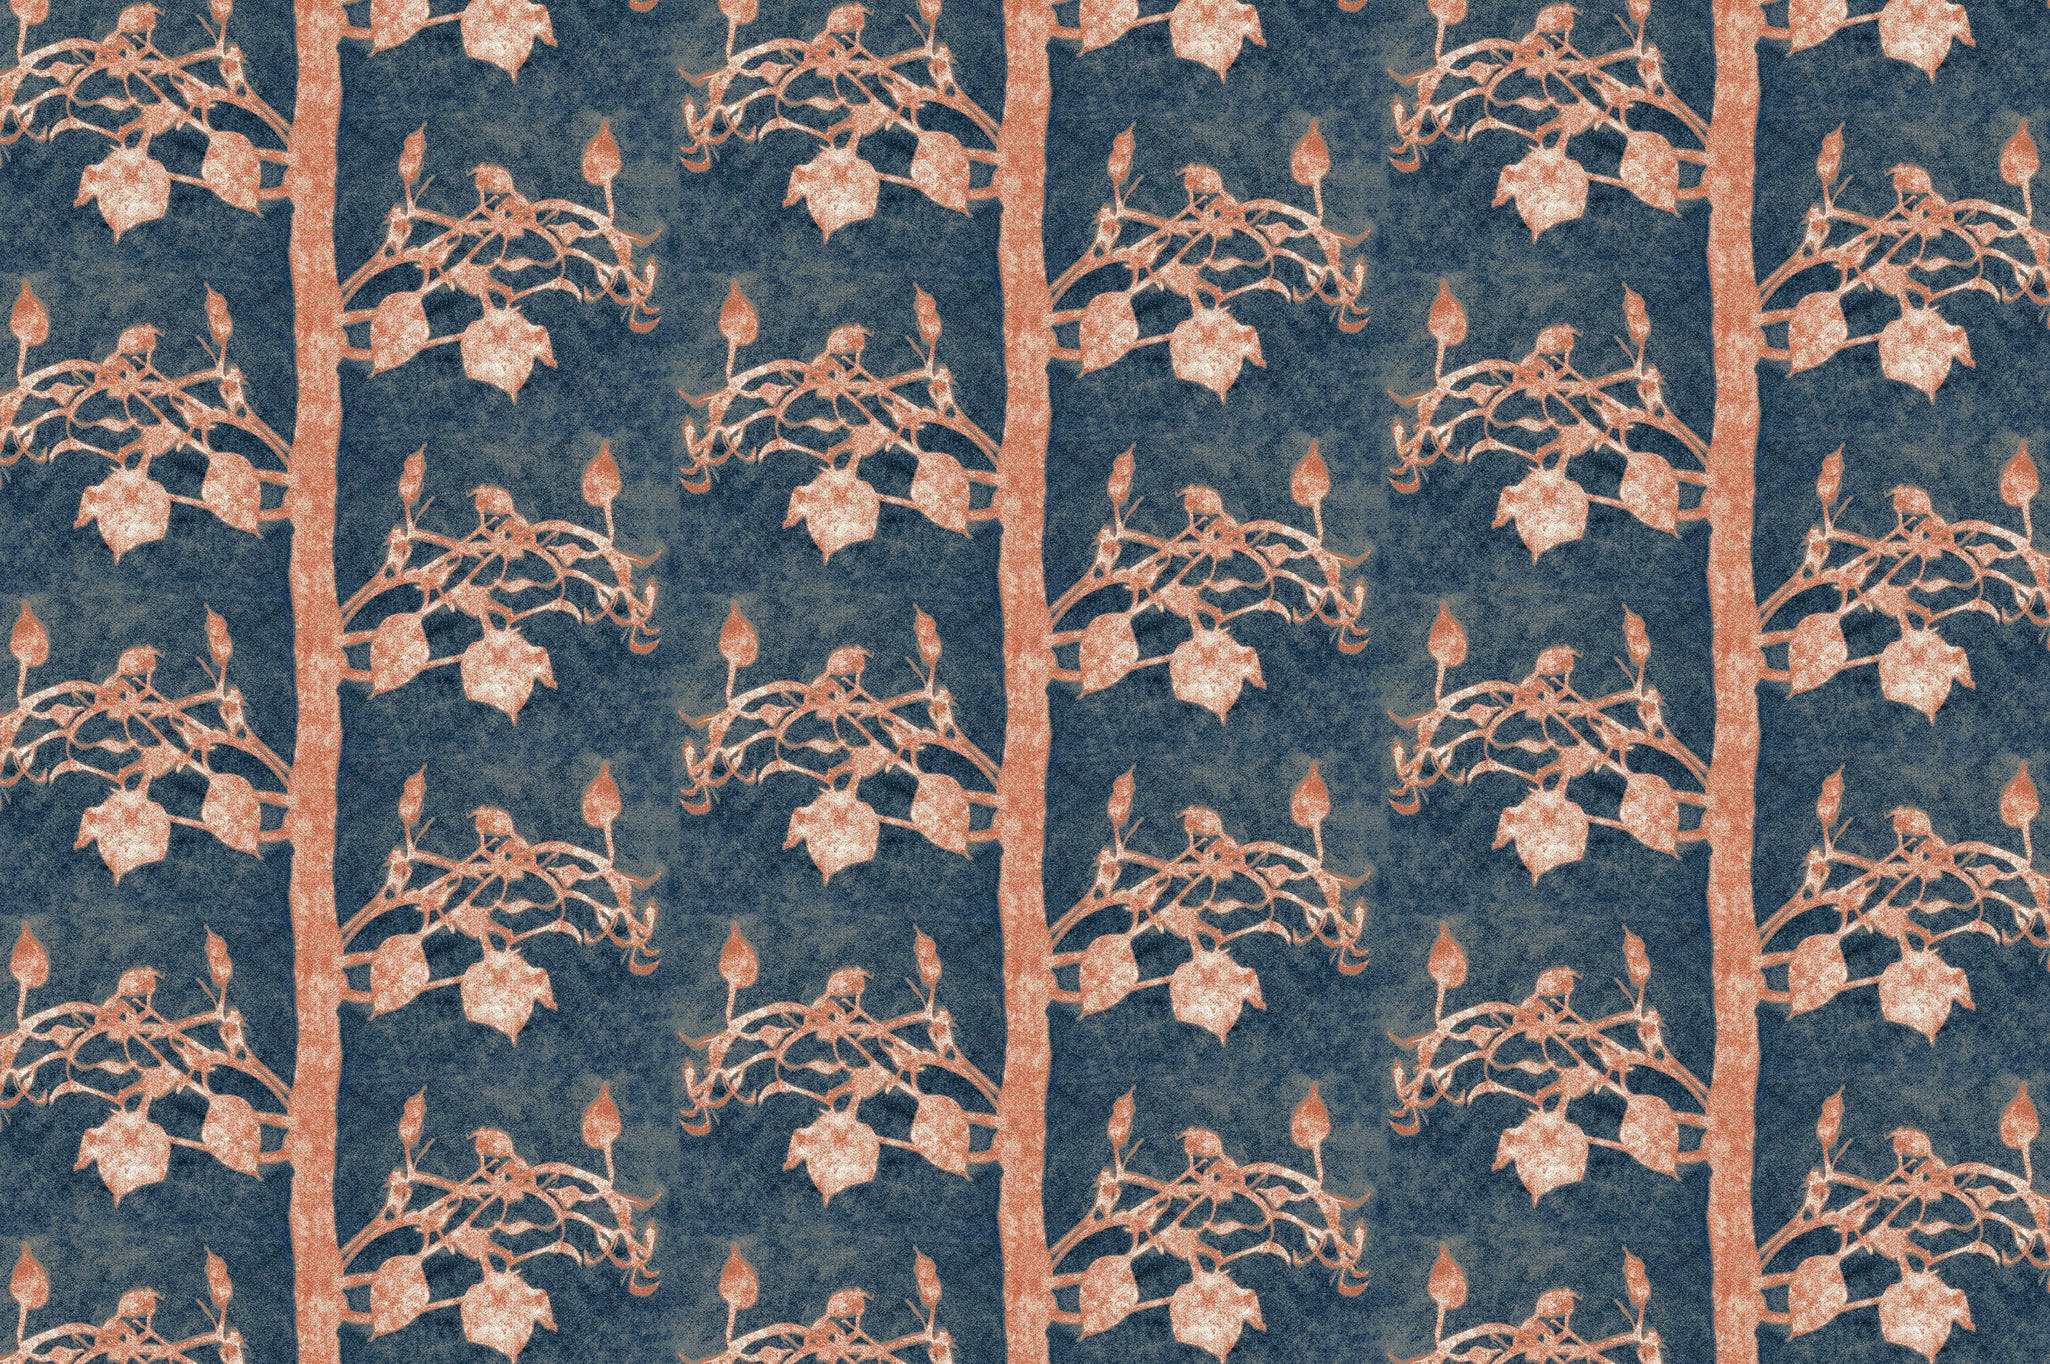 Detail of wallpaper in a linear tree and leaf print in burnt orange on a navy field.